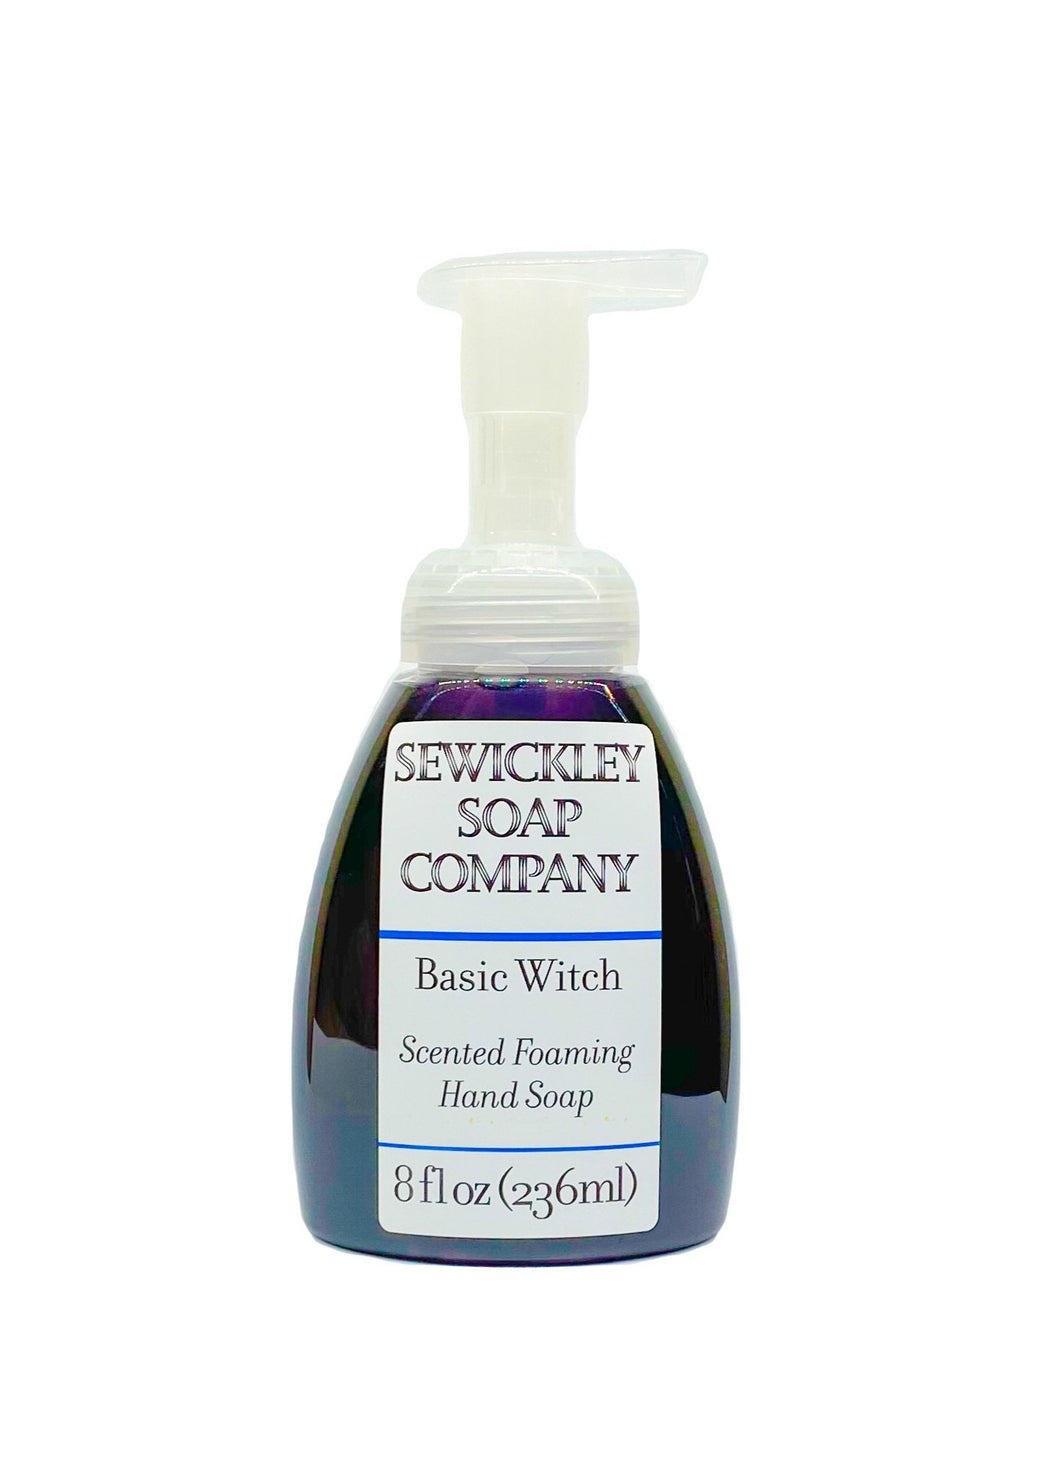 Basic Witch Scented Foaming Hand Soap